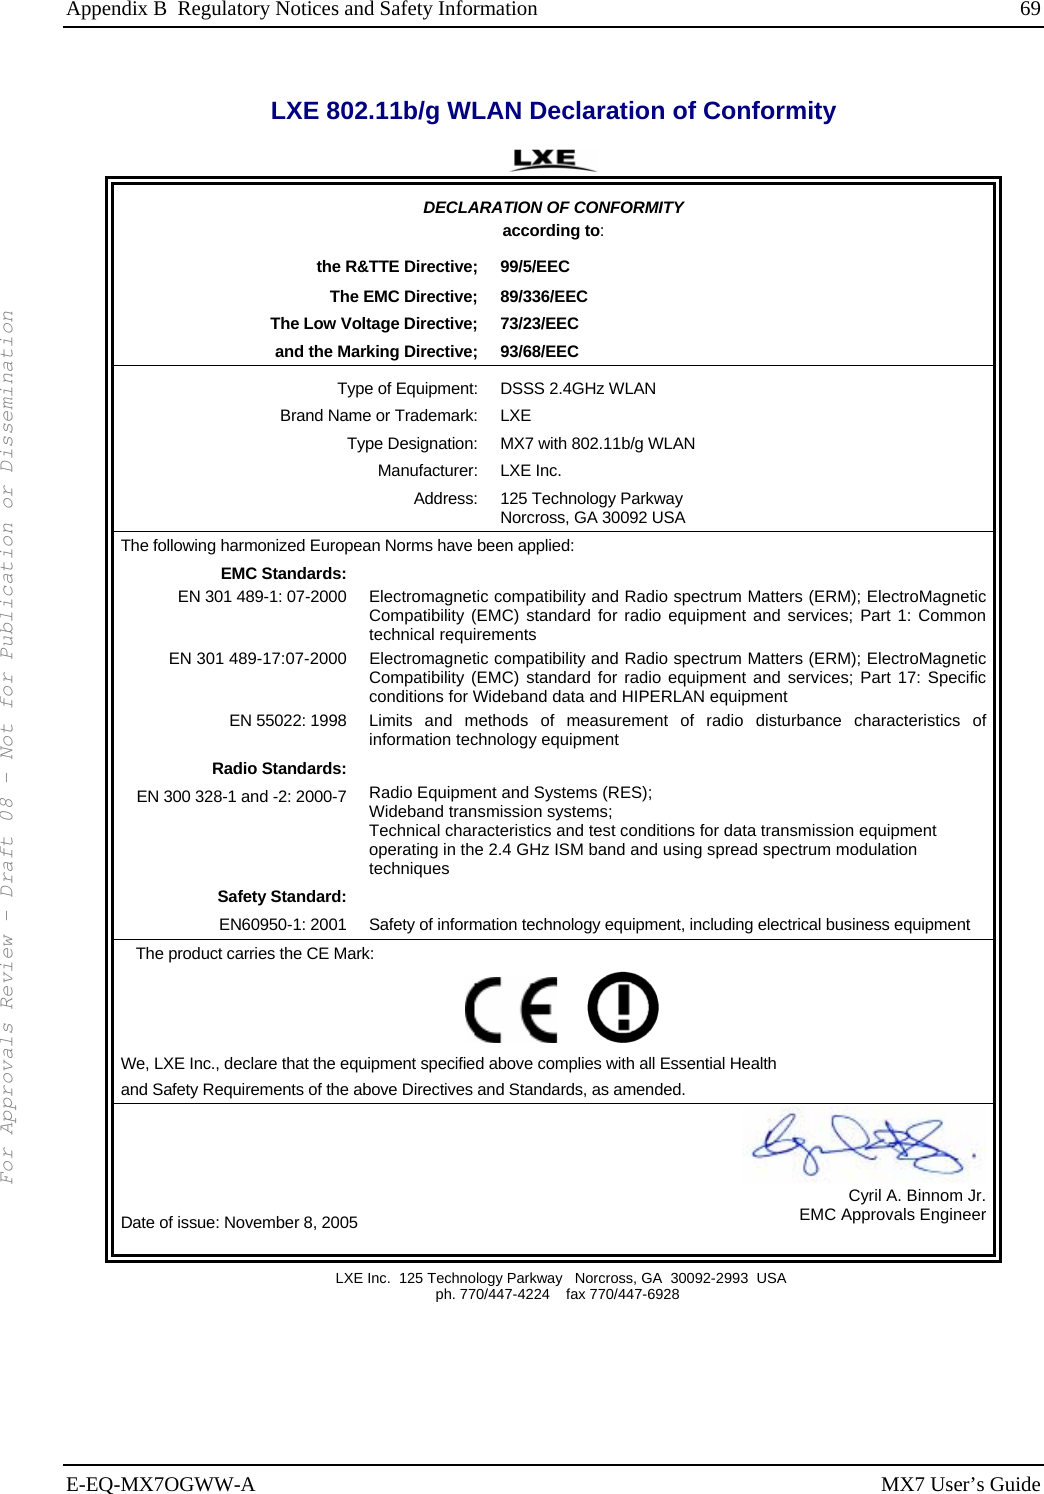 Appendix B  Regulatory Notices and Safety Information  69 E-EQ-MX7OGWW-A MX7 User’s Guide LXE 802.11b/g WLAN Declaration of Conformity  DECLARATION OF CONFORMITY according to: the R&amp;TTE Directive;  99/5/EEC The EMC Directive;  89/336/EEC The Low Voltage Directive;  73/23/EEC and the Marking Directive;  93/68/EEC Type of Equipment:  DSSS 2.4GHz WLAN Brand Name or Trademark:  LXE Type Designation:  MX7 with 802.11b/g WLAN  Manufacturer: LXE Inc. Address: 125 Technology Parkway Norcross, GA 30092 USA The following harmonized European Norms have been applied:   EMC Standards:  EN 301 489-1: 07-2000  Electromagnetic compatibility and Radio spectrum Matters (ERM); ElectroMagnetic Compatibility (EMC) standard for radio equipment and services; Part 1: Common technical requirements EN 301 489-17:07-2000  Electromagnetic compatibility and Radio spectrum Matters (ERM); ElectroMagnetic Compatibility (EMC) standard for radio equipment and services; Part 17: Specific conditions for Wideband data and HIPERLAN equipment EN 55022: 1998 Limits and methods of measurement of radio disturbance characteristics of information technology equipment Radio Standards:  EN 300 328-1 and -2: 2000-7 Radio Equipment and Systems (RES); Wideband transmission systems; Technical characteristics and test conditions for data transmission equipment operating in the 2.4 GHz ISM band and using spread spectrum modulation techniques Safety Standard:  EN60950-1: 2001 Safety of information technology equipment, including electrical business equipment The product carries the CE Mark:         We, LXE Inc., declare that the equipment specified above complies with all Essential Health  and Safety Requirements of the above Directives and Standards, as amended. Date of issue: November 8, 2005 Cyril A. Binnom Jr.EMC Approvals Engineer  LXE Inc.  125 Technology Parkway   Norcross, GA  30092-2993  USA   ph. 770/447-4224    fax 770/447-6928   For Approvals Review - Draft 08 - Not for Publication or Dissemination